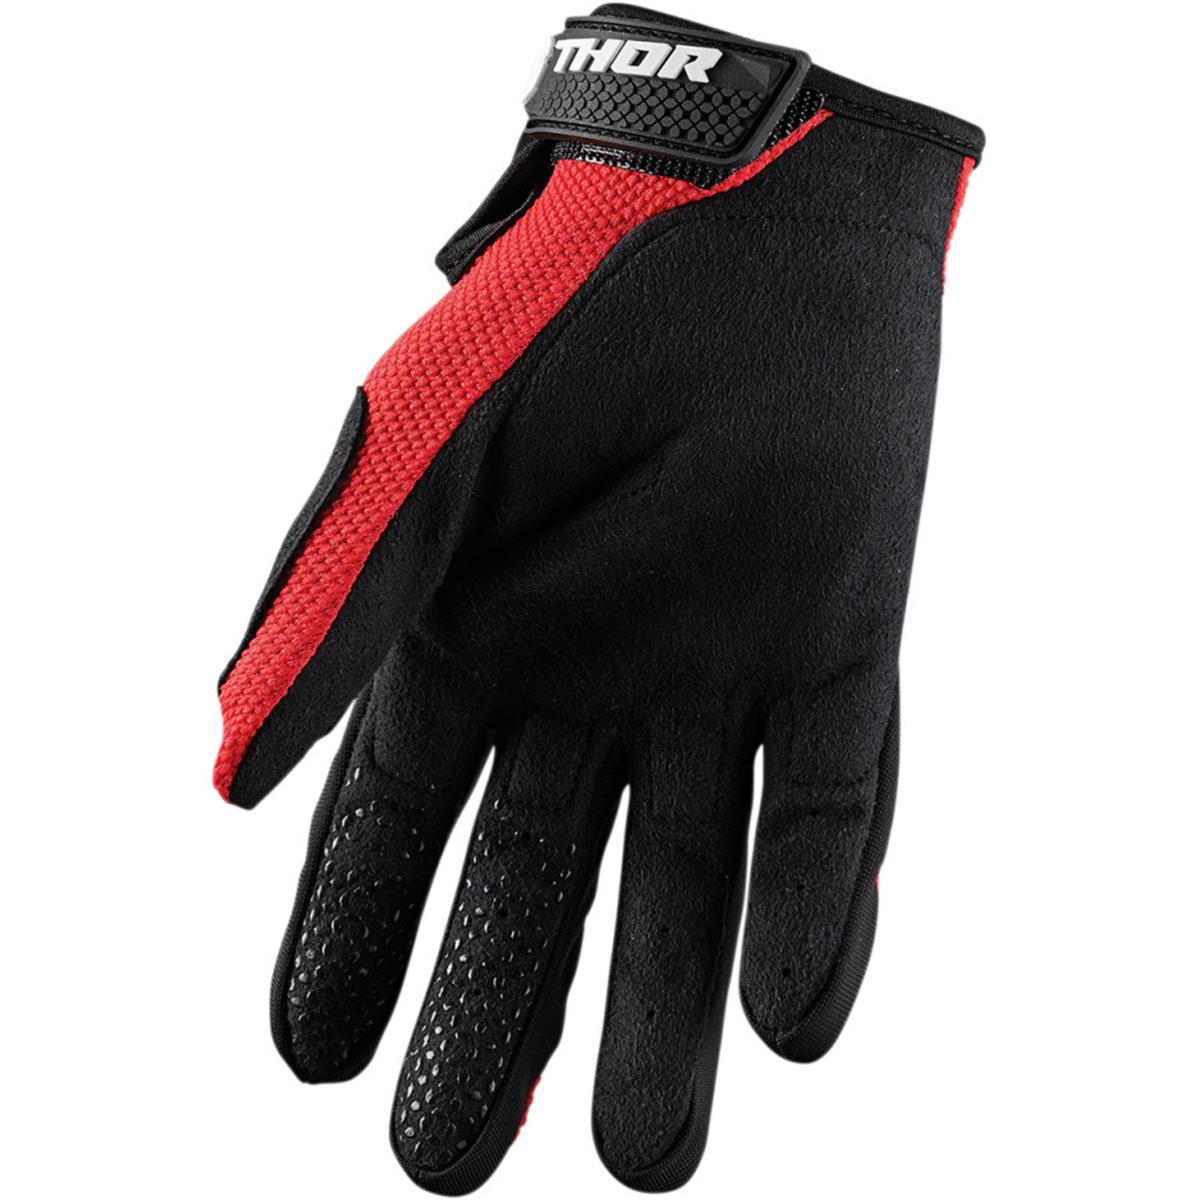 Thor Motocross Enduro MX Offroad Race Gloves Sector Red Black Adults 